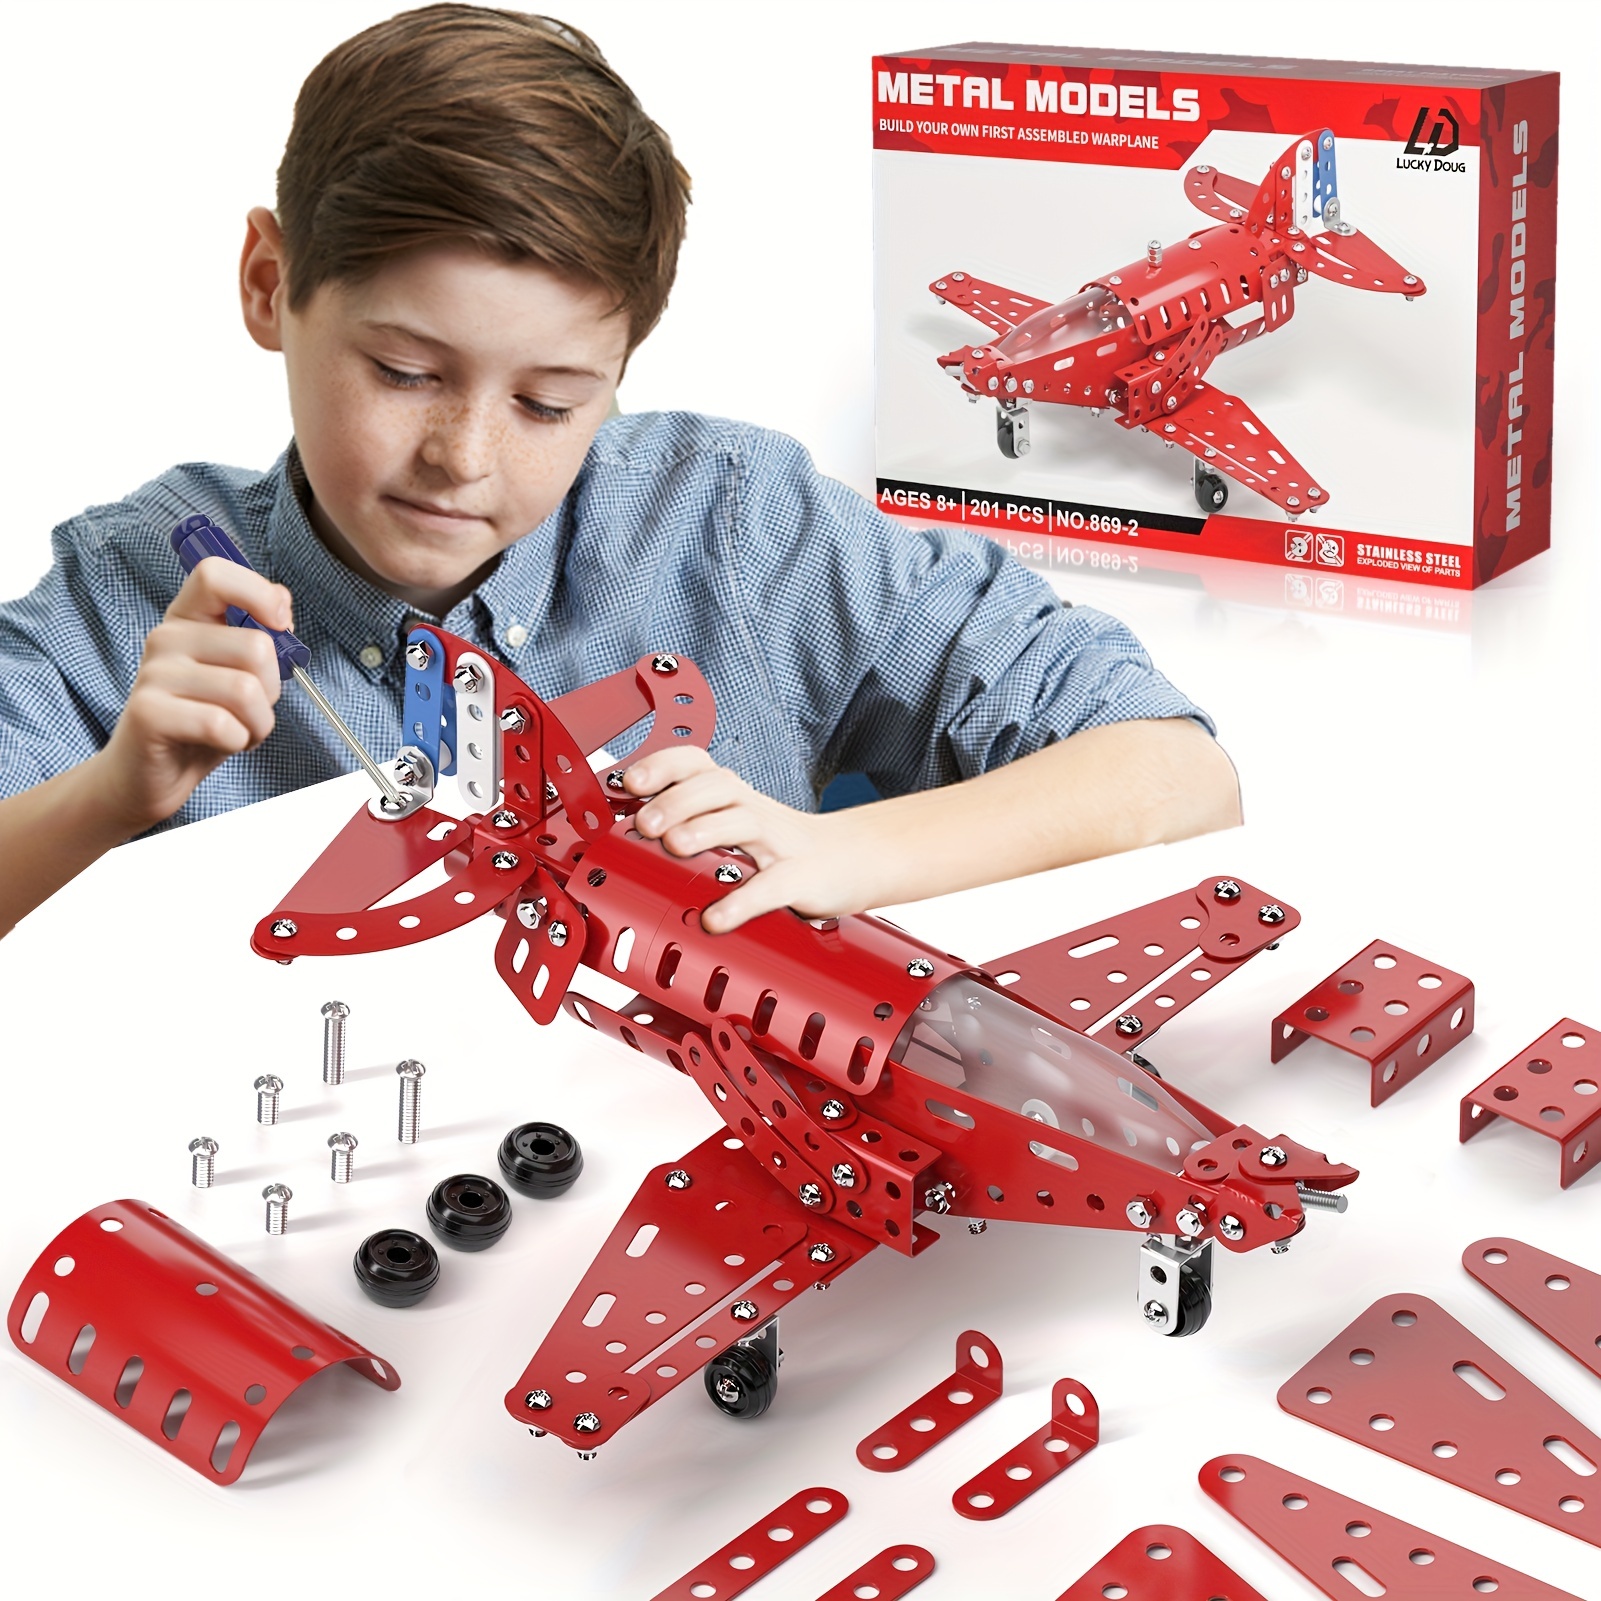  COSKEHAN STEM Assembled Model Plane Kit Building Toy, 201  Pieces STEM Projects Airplane Building Kits for Kids Age 8-12, STEM  Educational Model Kit Gifts for Teenage Boys & Girls 8+, Red